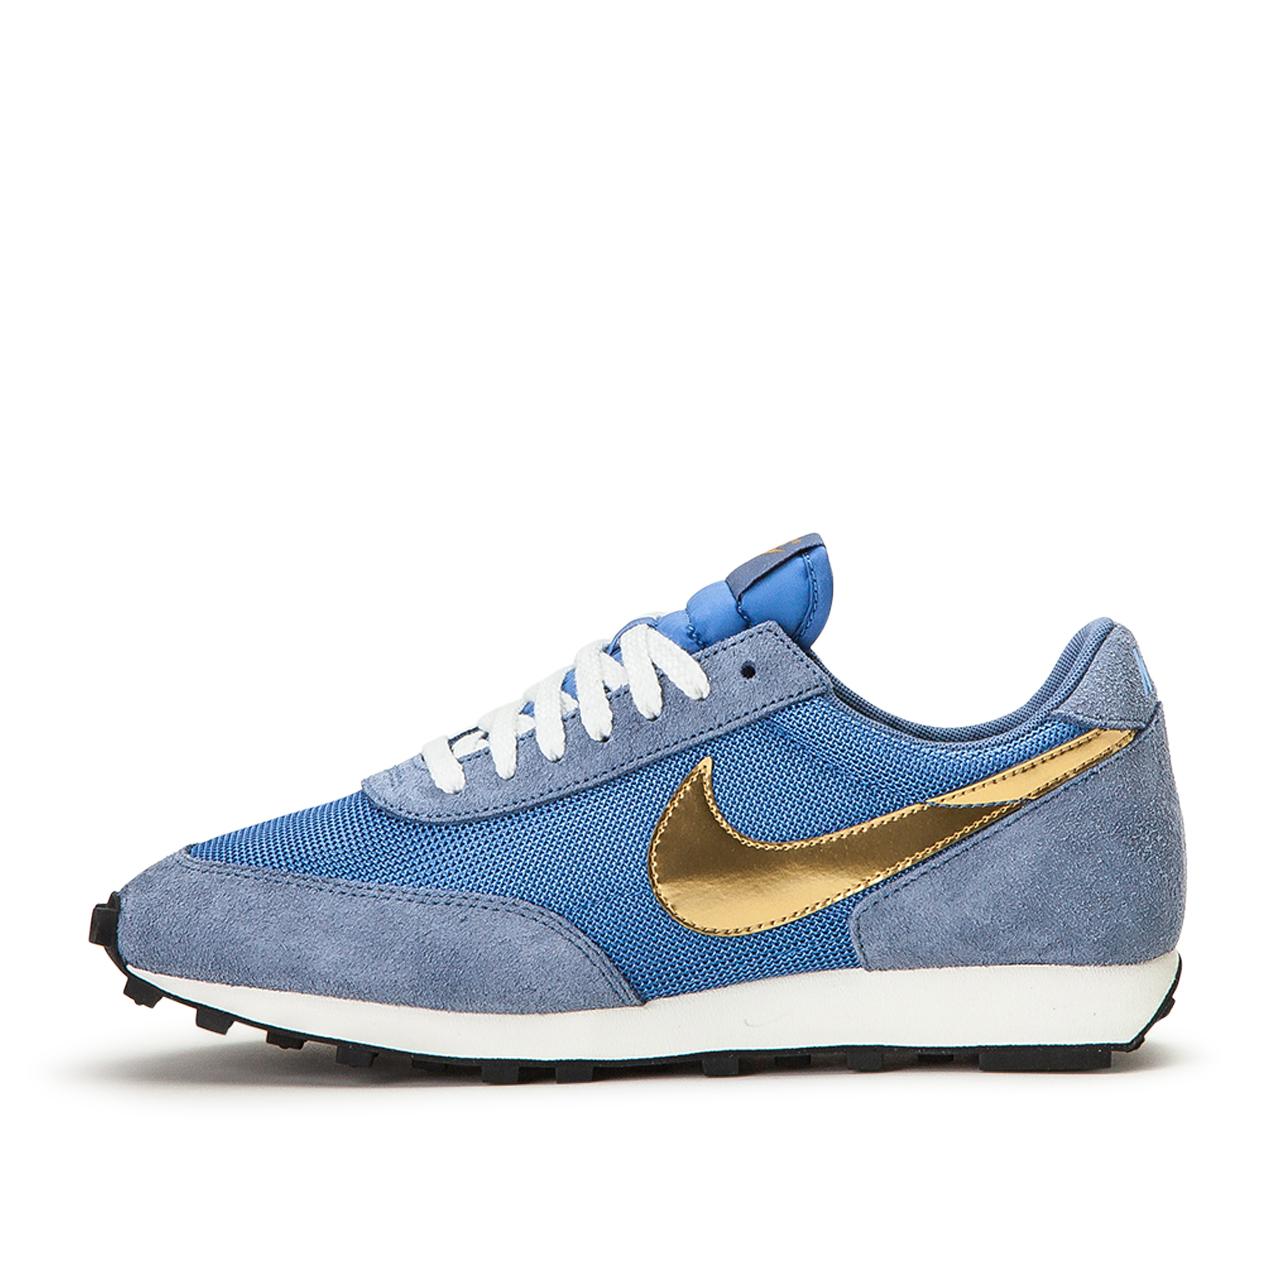 Nike Daybreak Sp Suede And Mesh Sneakers in Blue for Men - Lyst